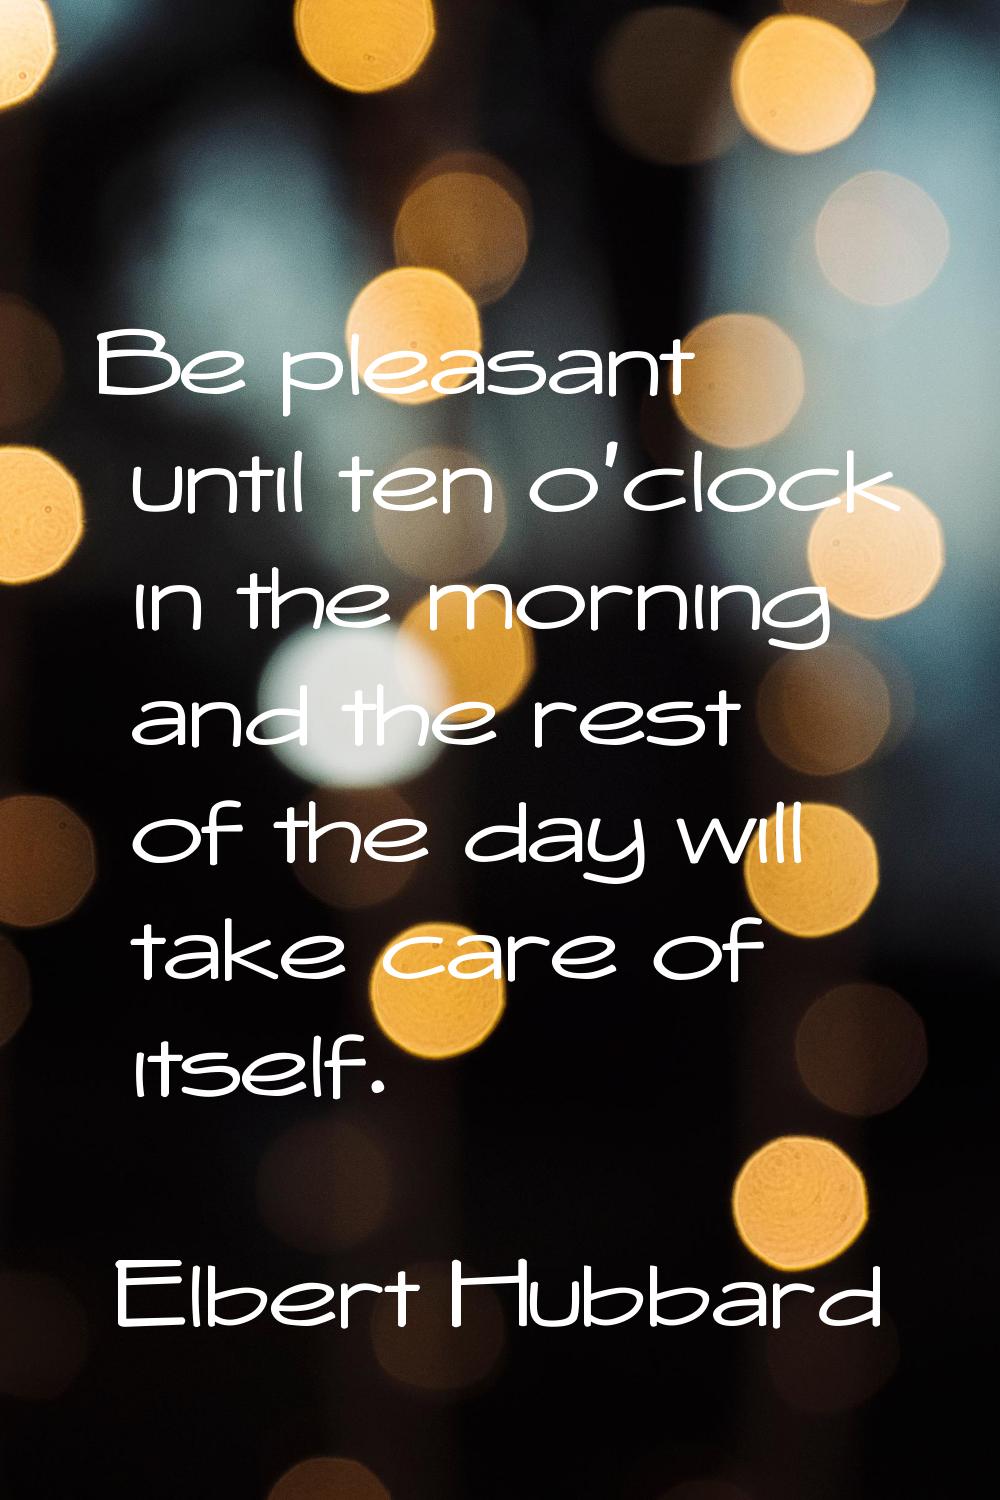 Be pleasant until ten o'clock in the morning and the rest of the day will take care of itself.